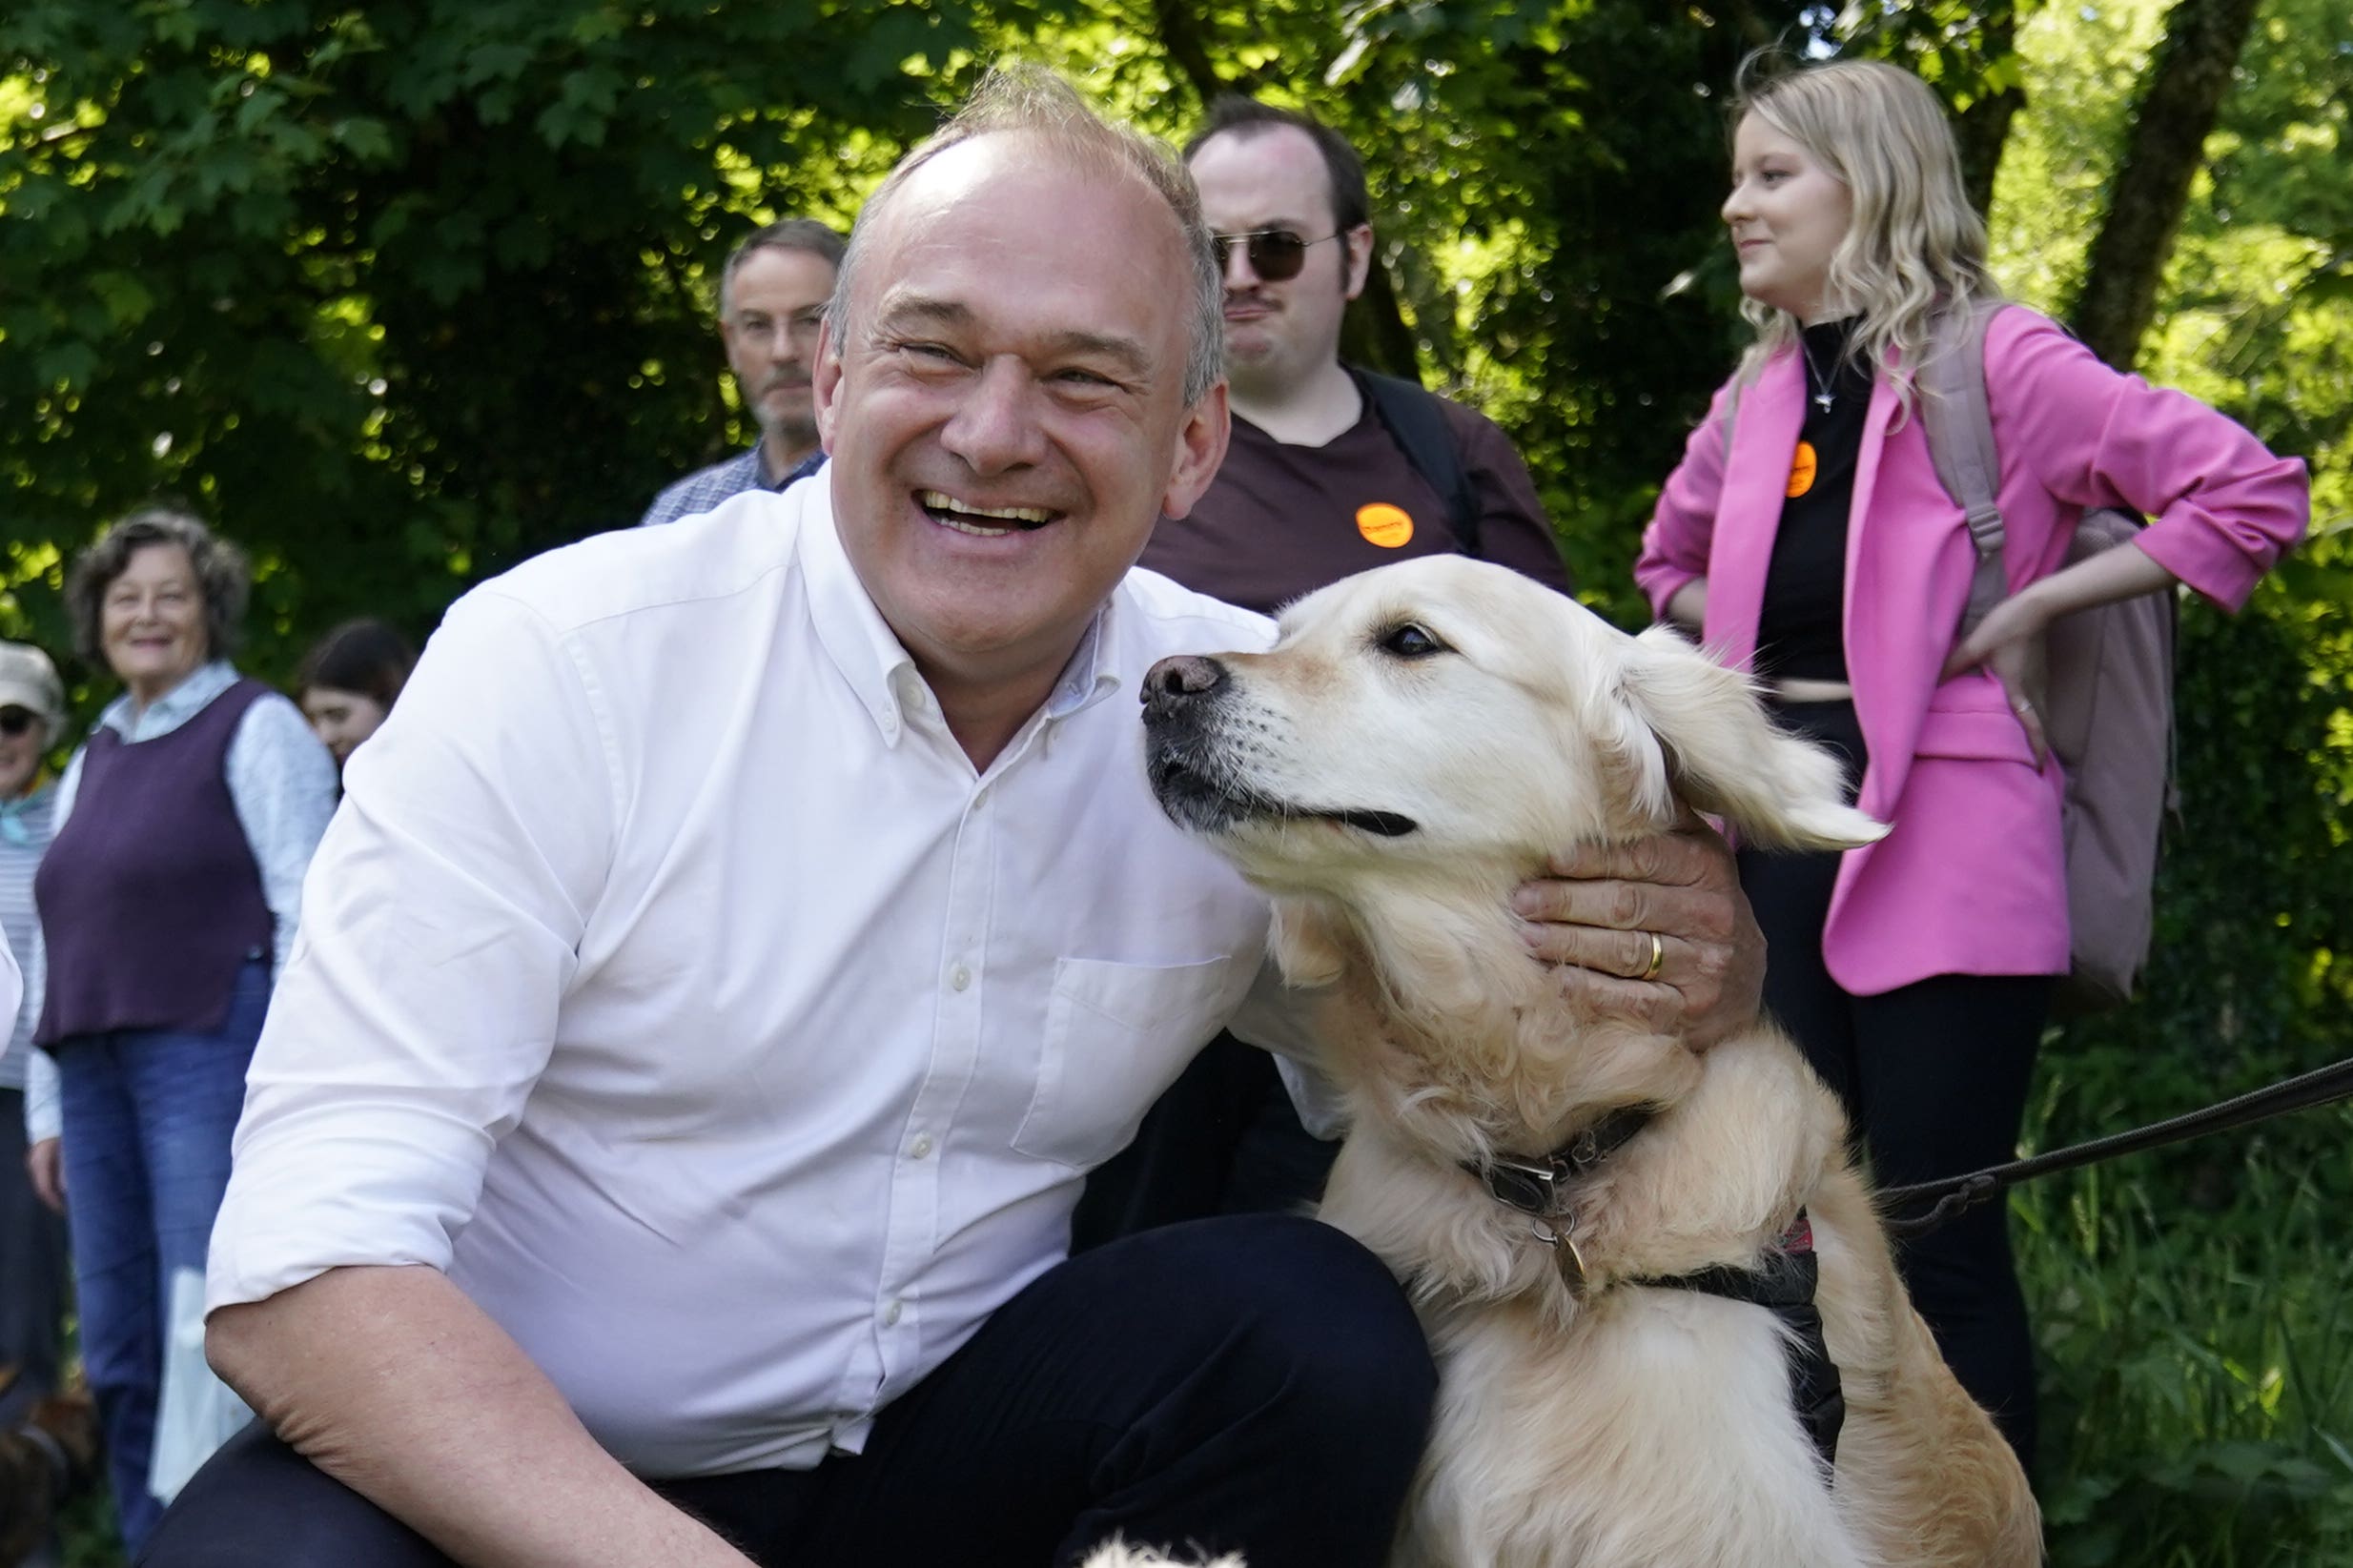 Liberal Democrat leader Sir Ed Davey joined supporters for a dog walk near Winchester on Saturday